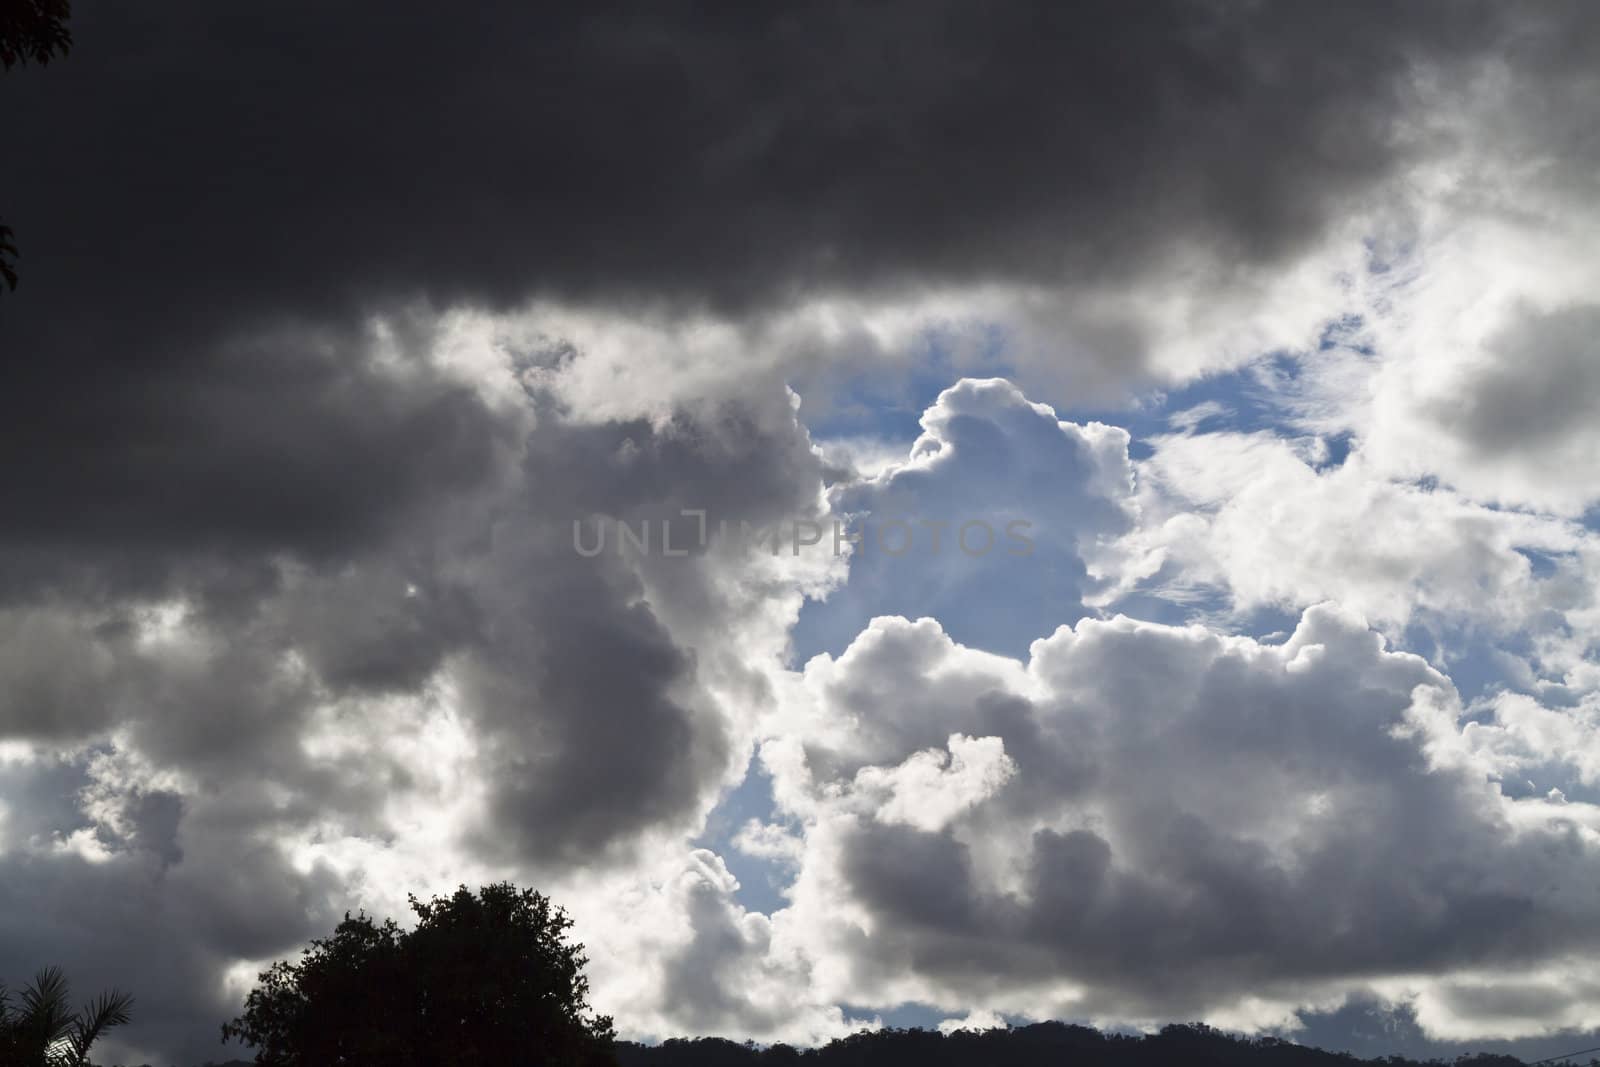 dark clouds forming on the sky with sillhouette of foliage at the bottom frame